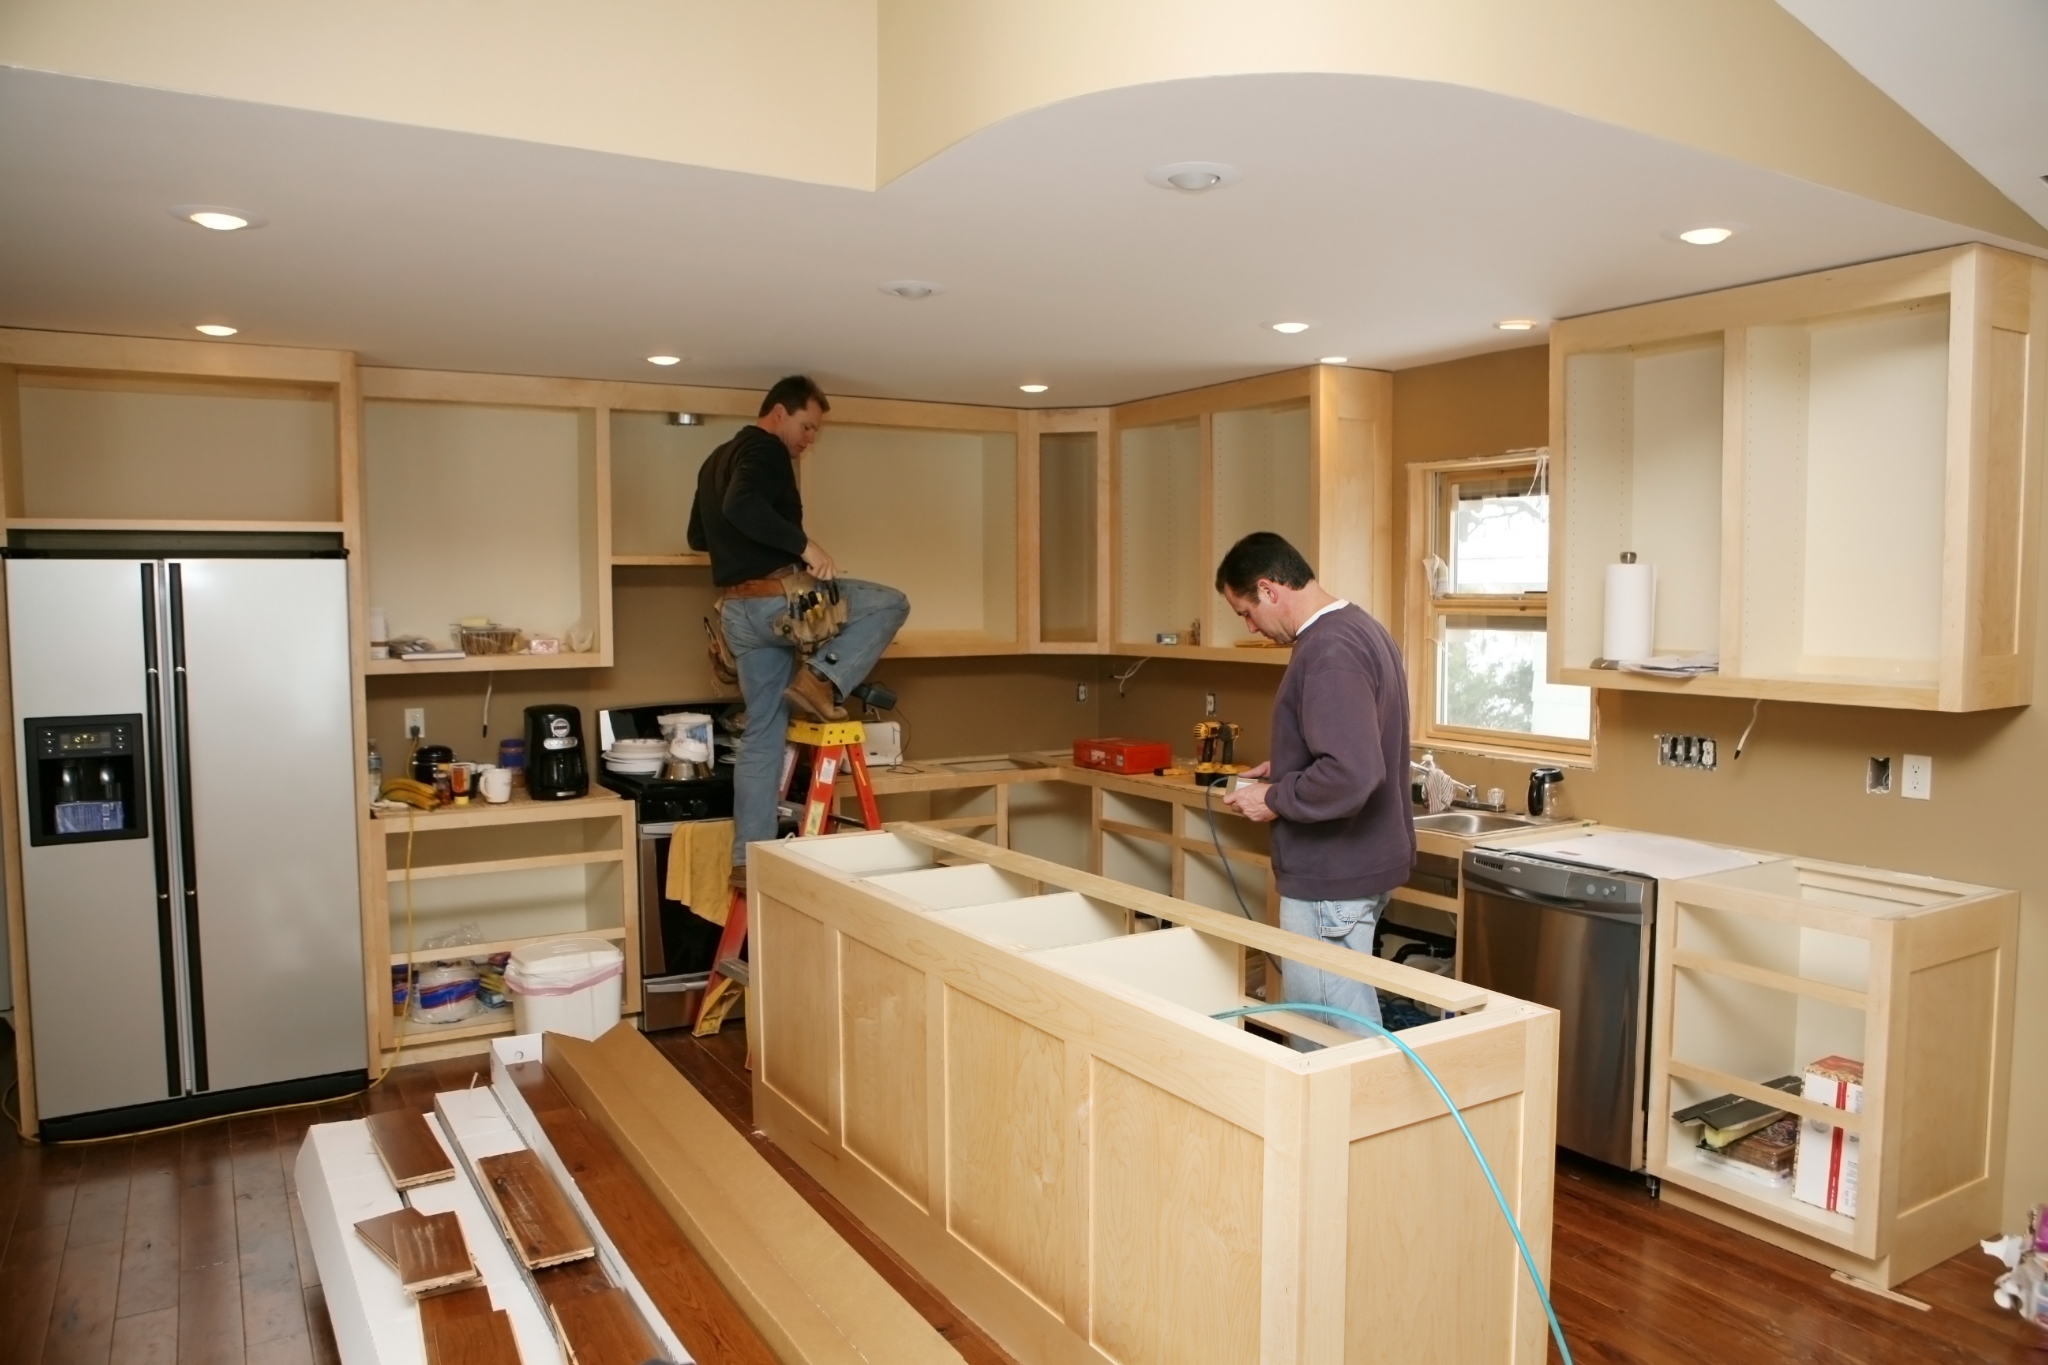 Kitchen Remodel Return On Investment, How Much Does It Cost To Install Kitchen Cabinets In California